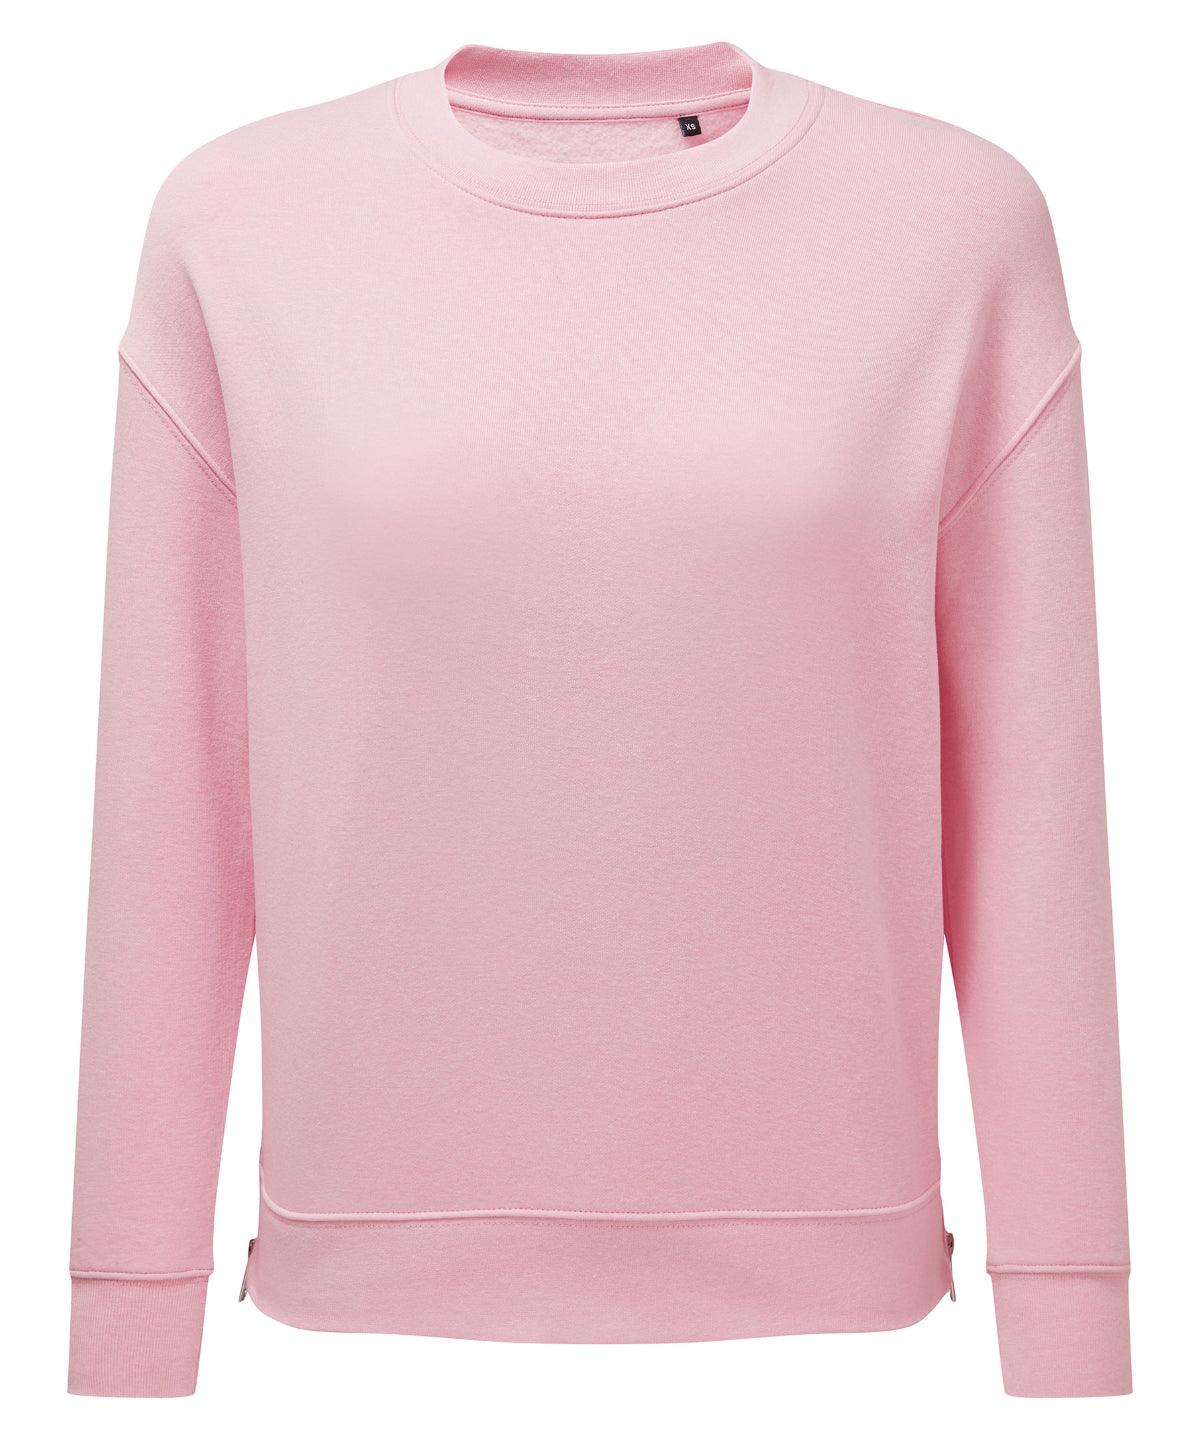 Light Pink - Women's TriDri® Recycled Chill Zip Sweatshirt Sweatshirts TriDri® Activewear & Performance, Back to the Gym, Exclusives, New Styles For 2022, Women's Fashion Schoolwear Centres